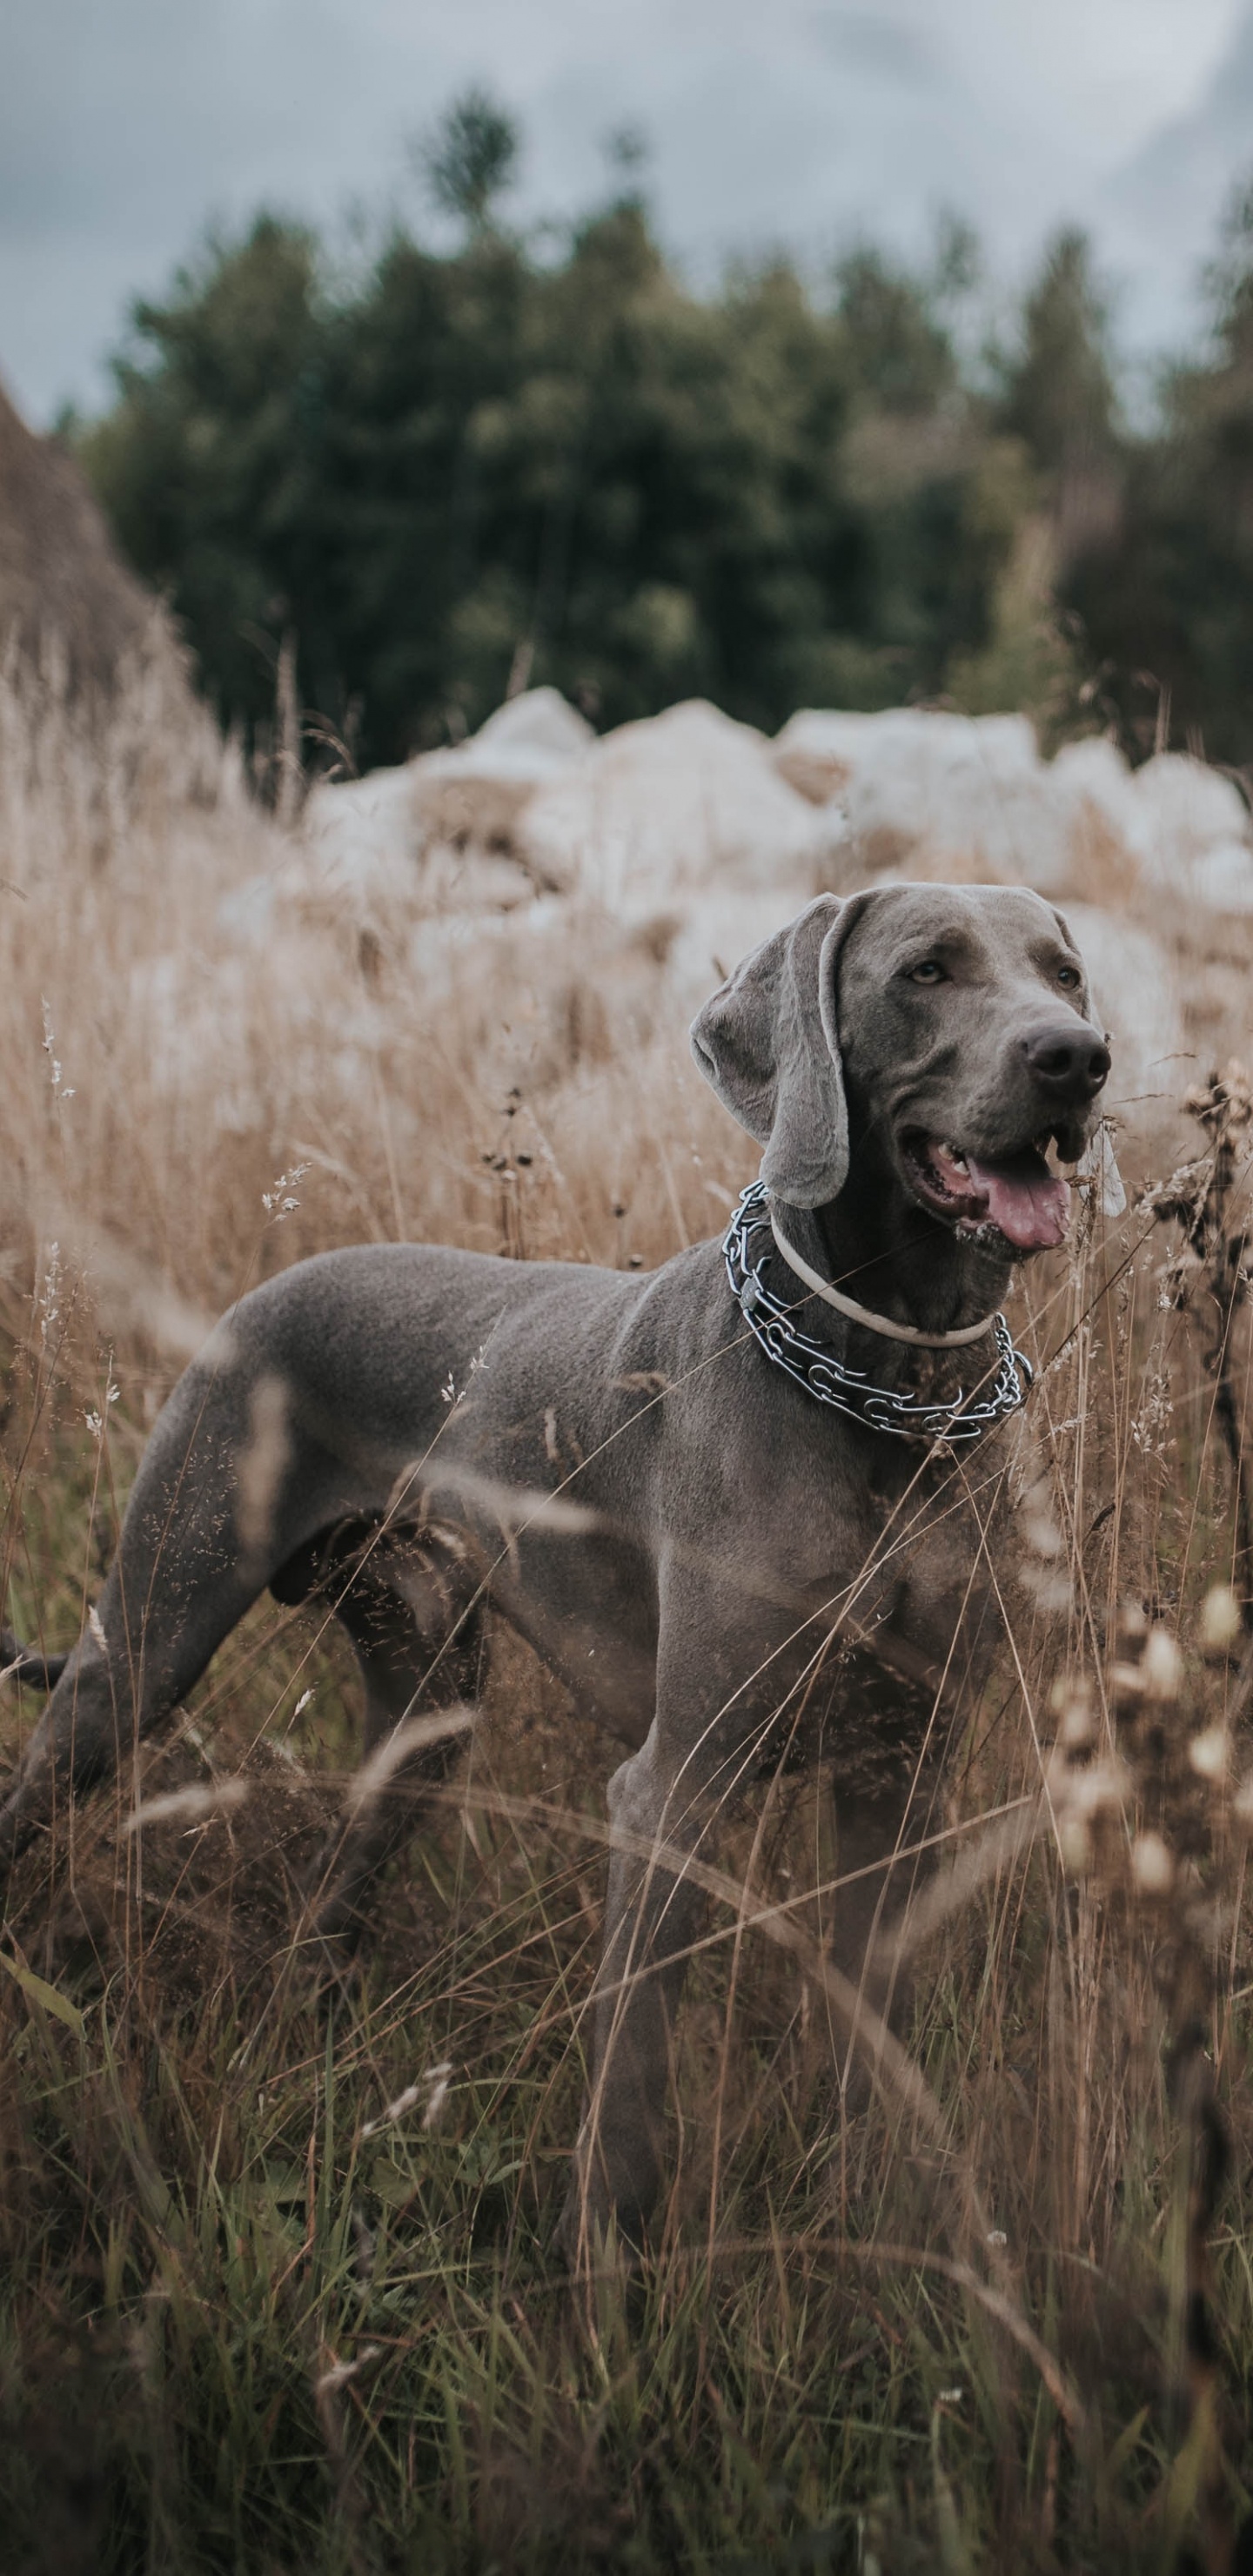 Gray Short Coated Dog on Brown Grass Field During Daytime. Wallpaper in 1440x2960 Resolution